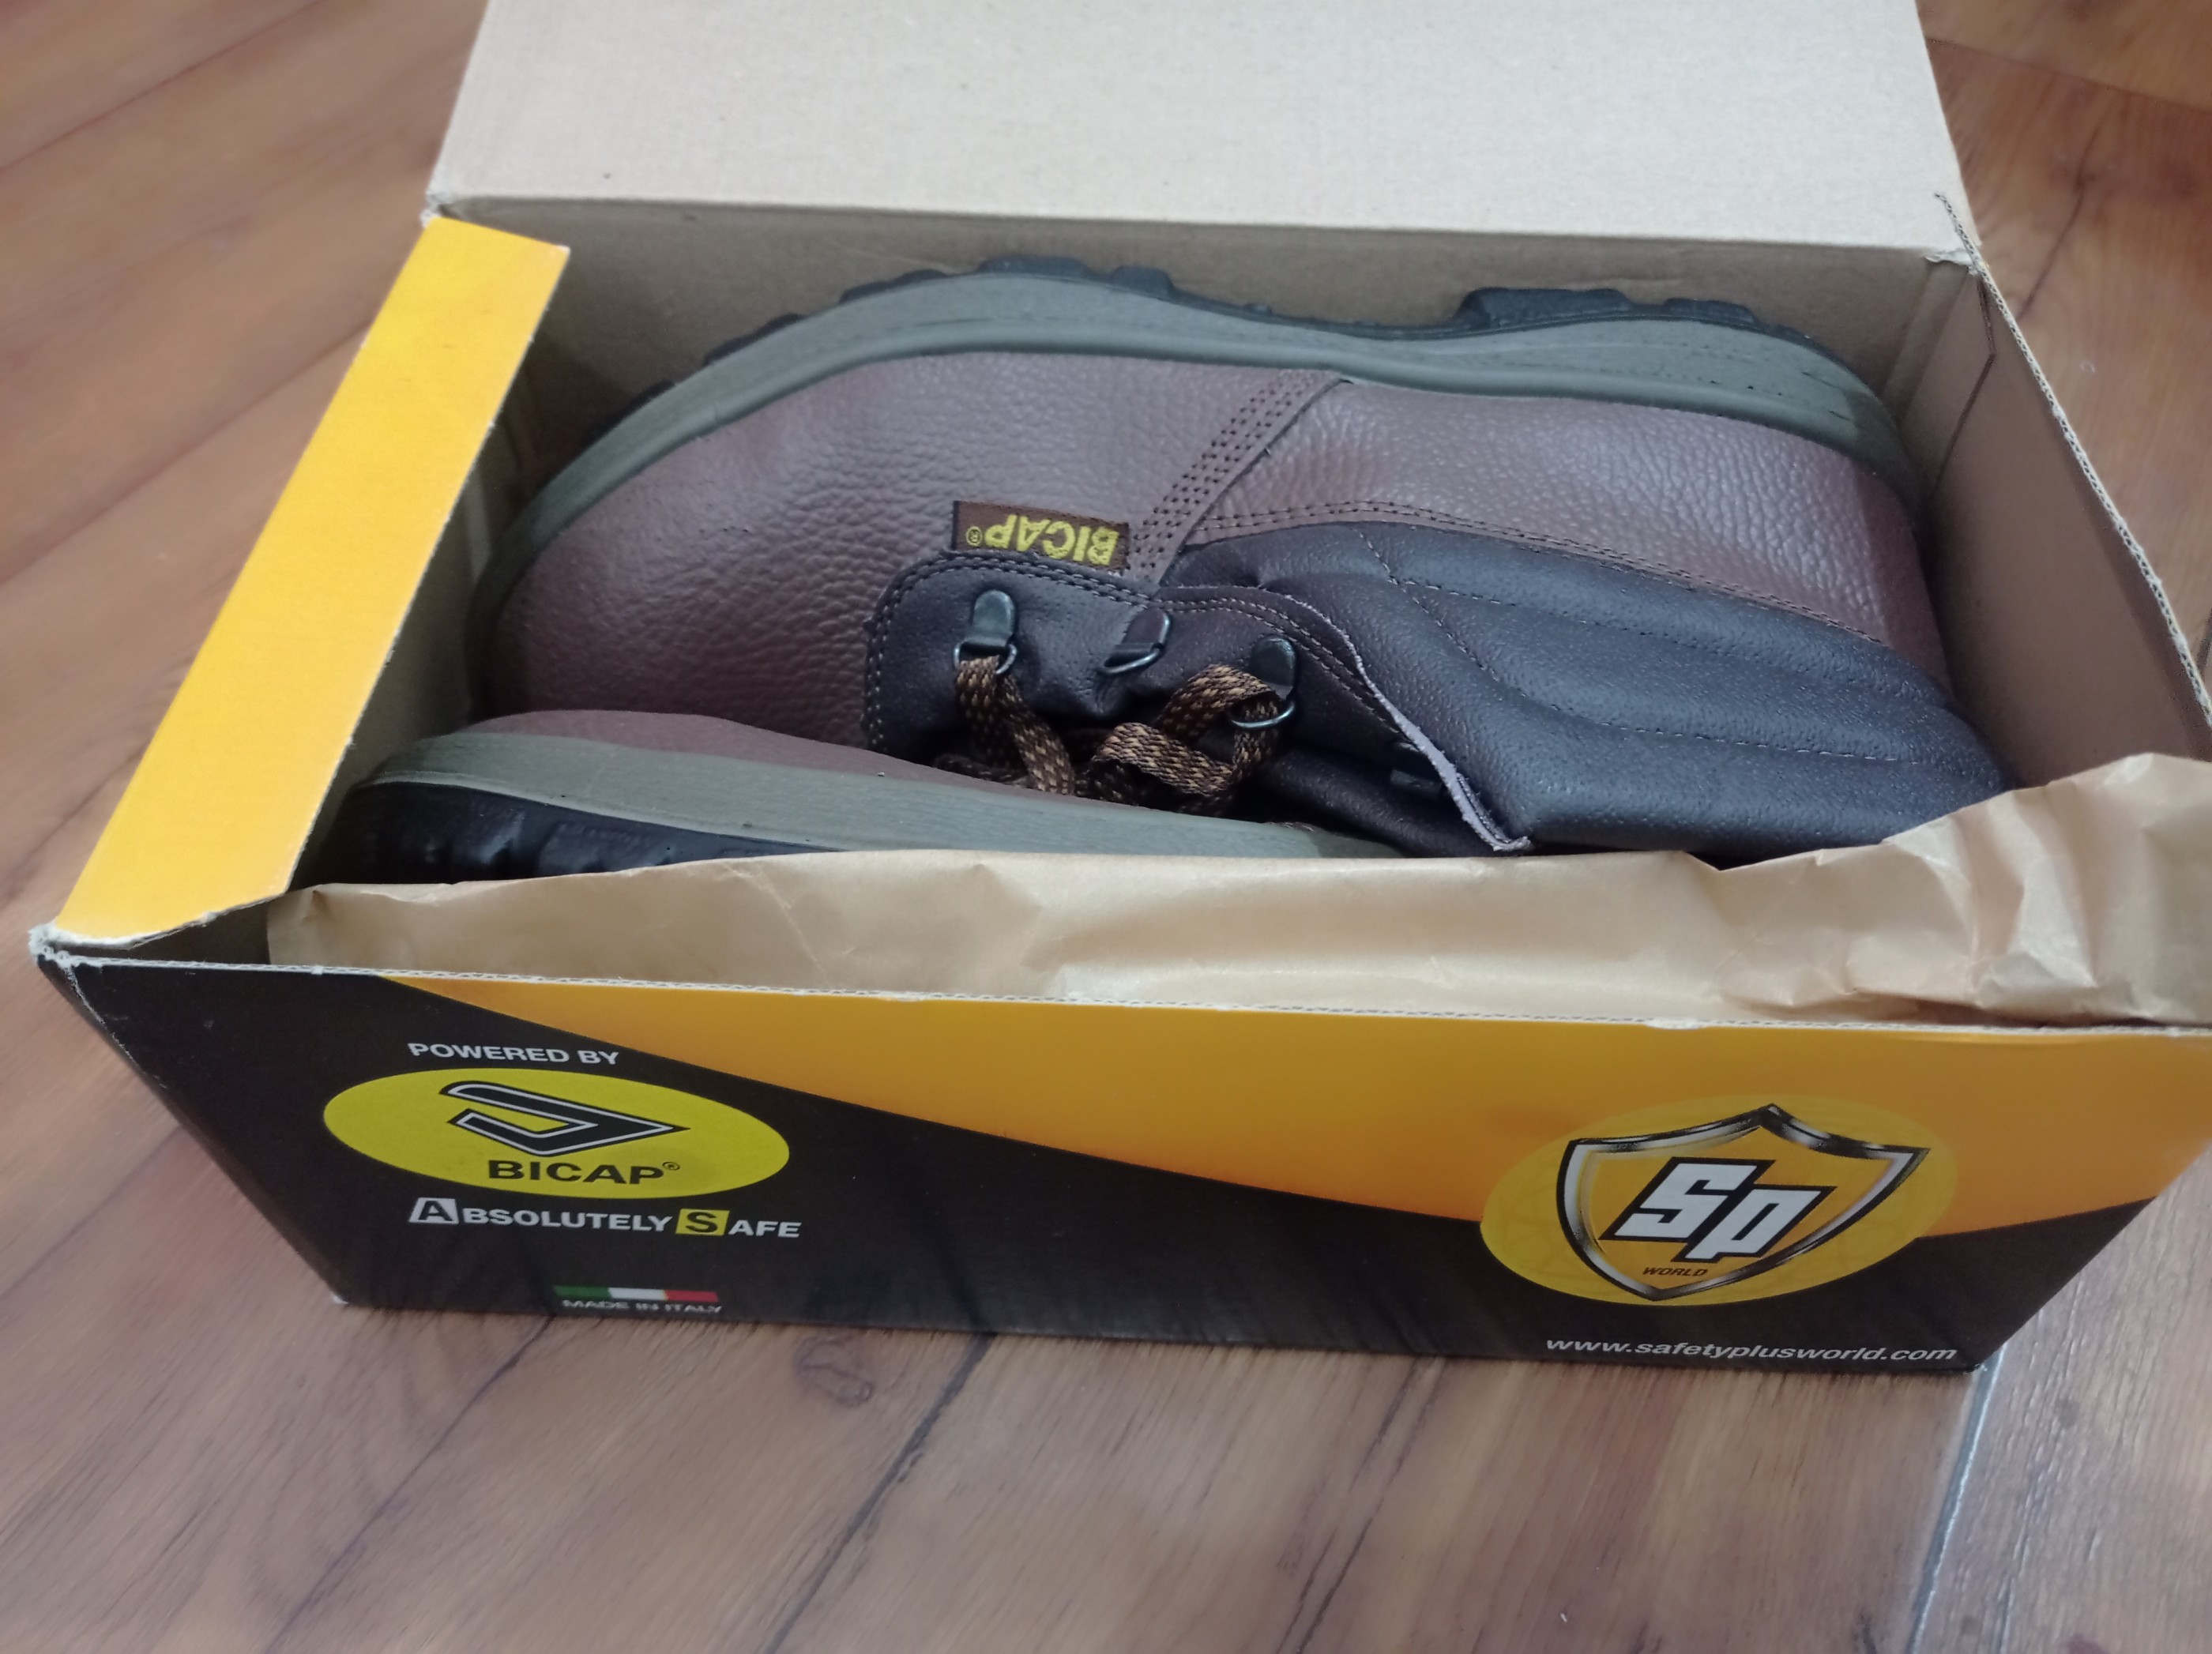 Safety shoes ( Bicap and Burgan)for sale, brand new, 43 size